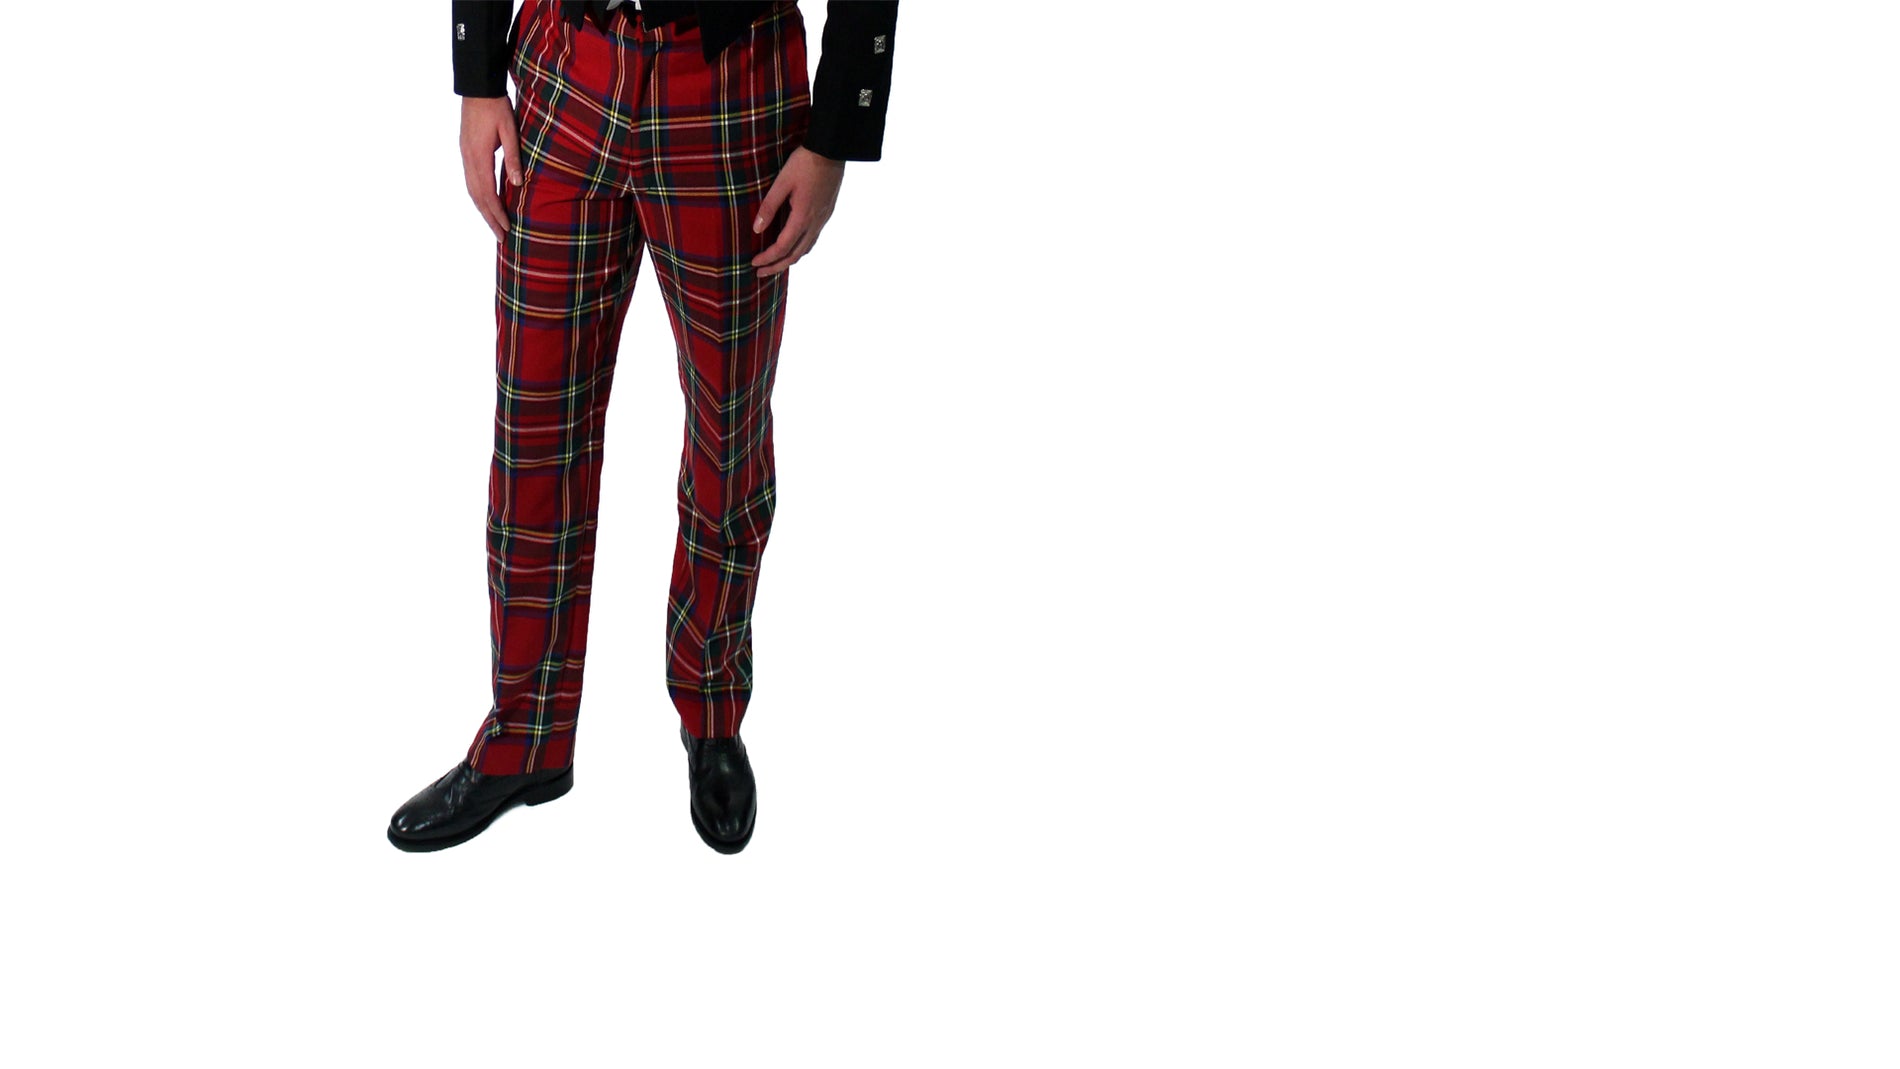 Where did Tartan Trews come from?